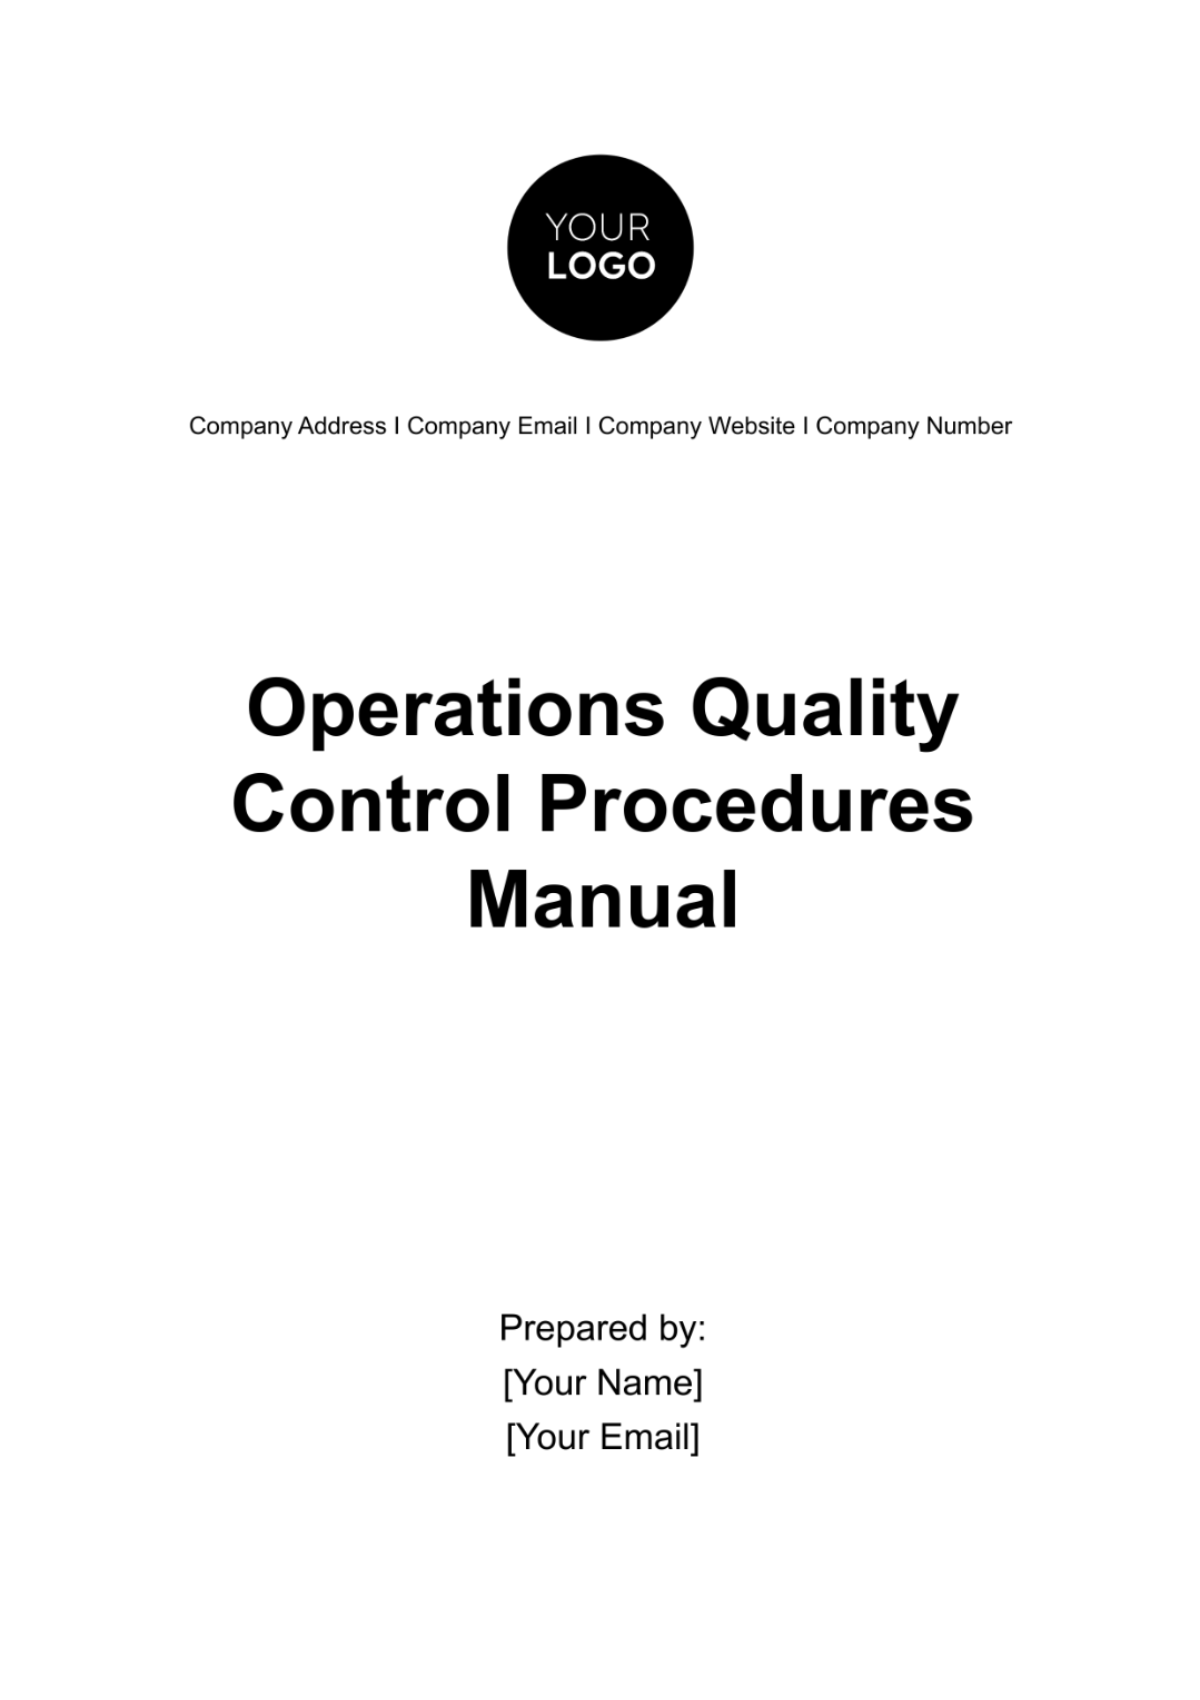 Operations Quality Control Procedures Manual Template